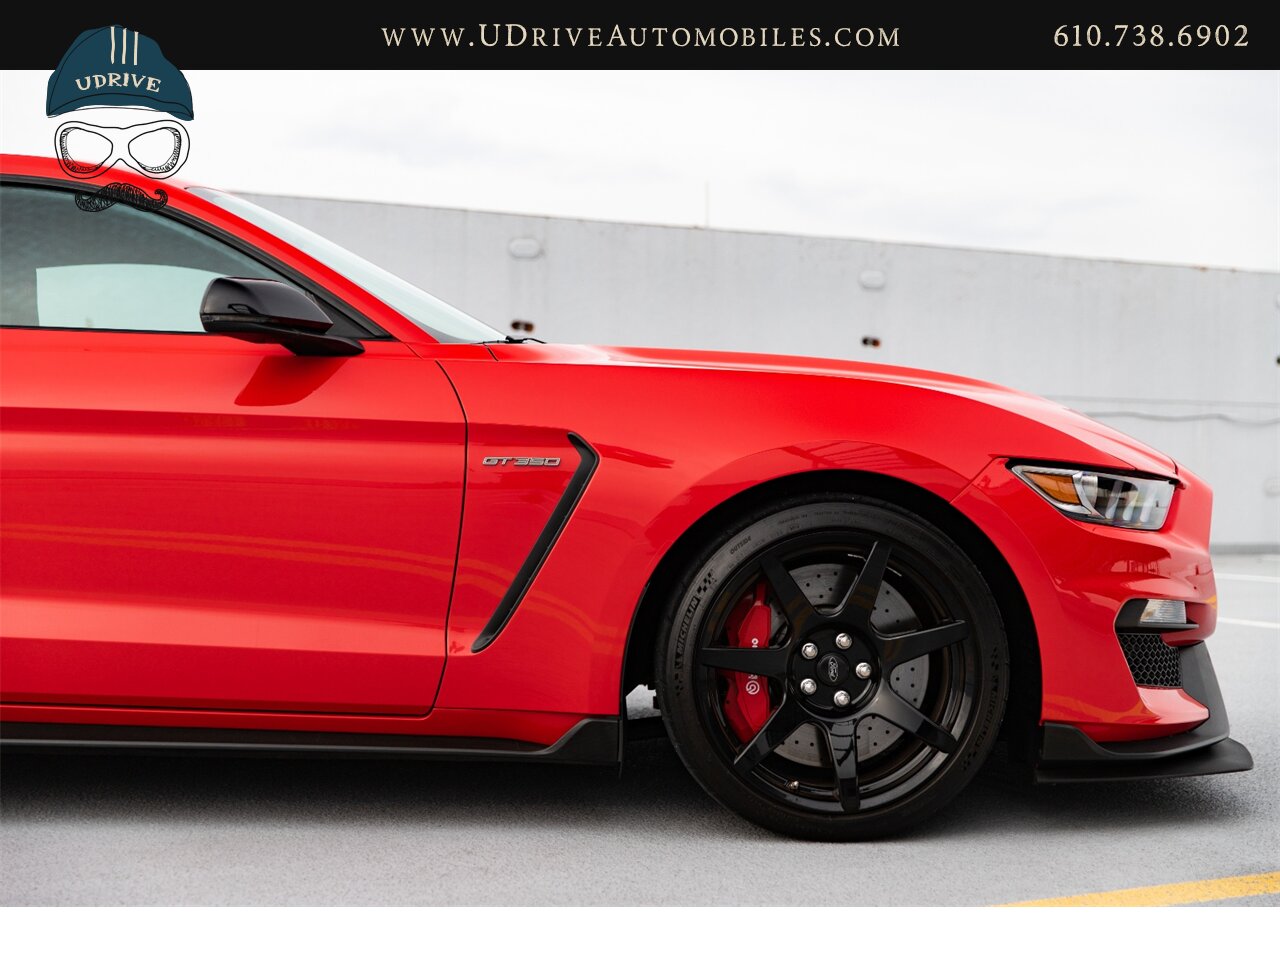 2016 Ford Mustang Shelby GT350R 3k Miles Electronics Pkg  1 of 32 Race Red Produced for USA As New - Photo 20 - West Chester, PA 19382